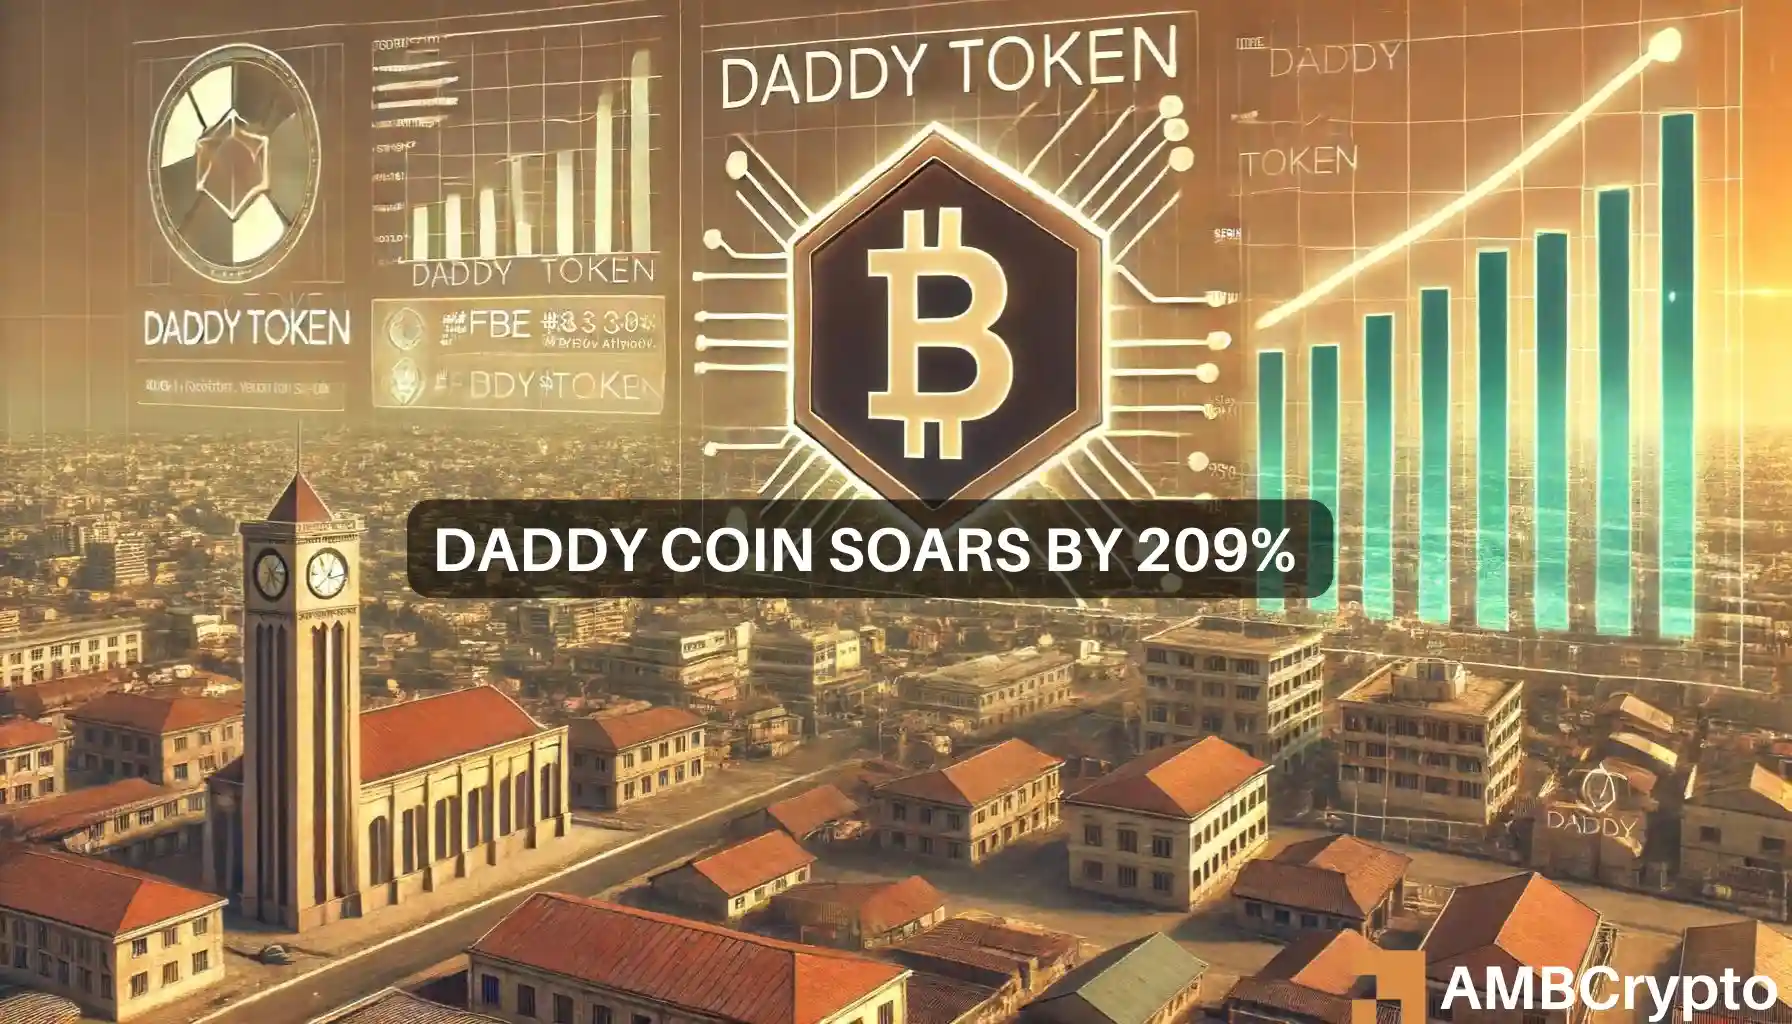 Andrew Tate’s DADDY coin bumps 209%: Is insider trading playing a part?